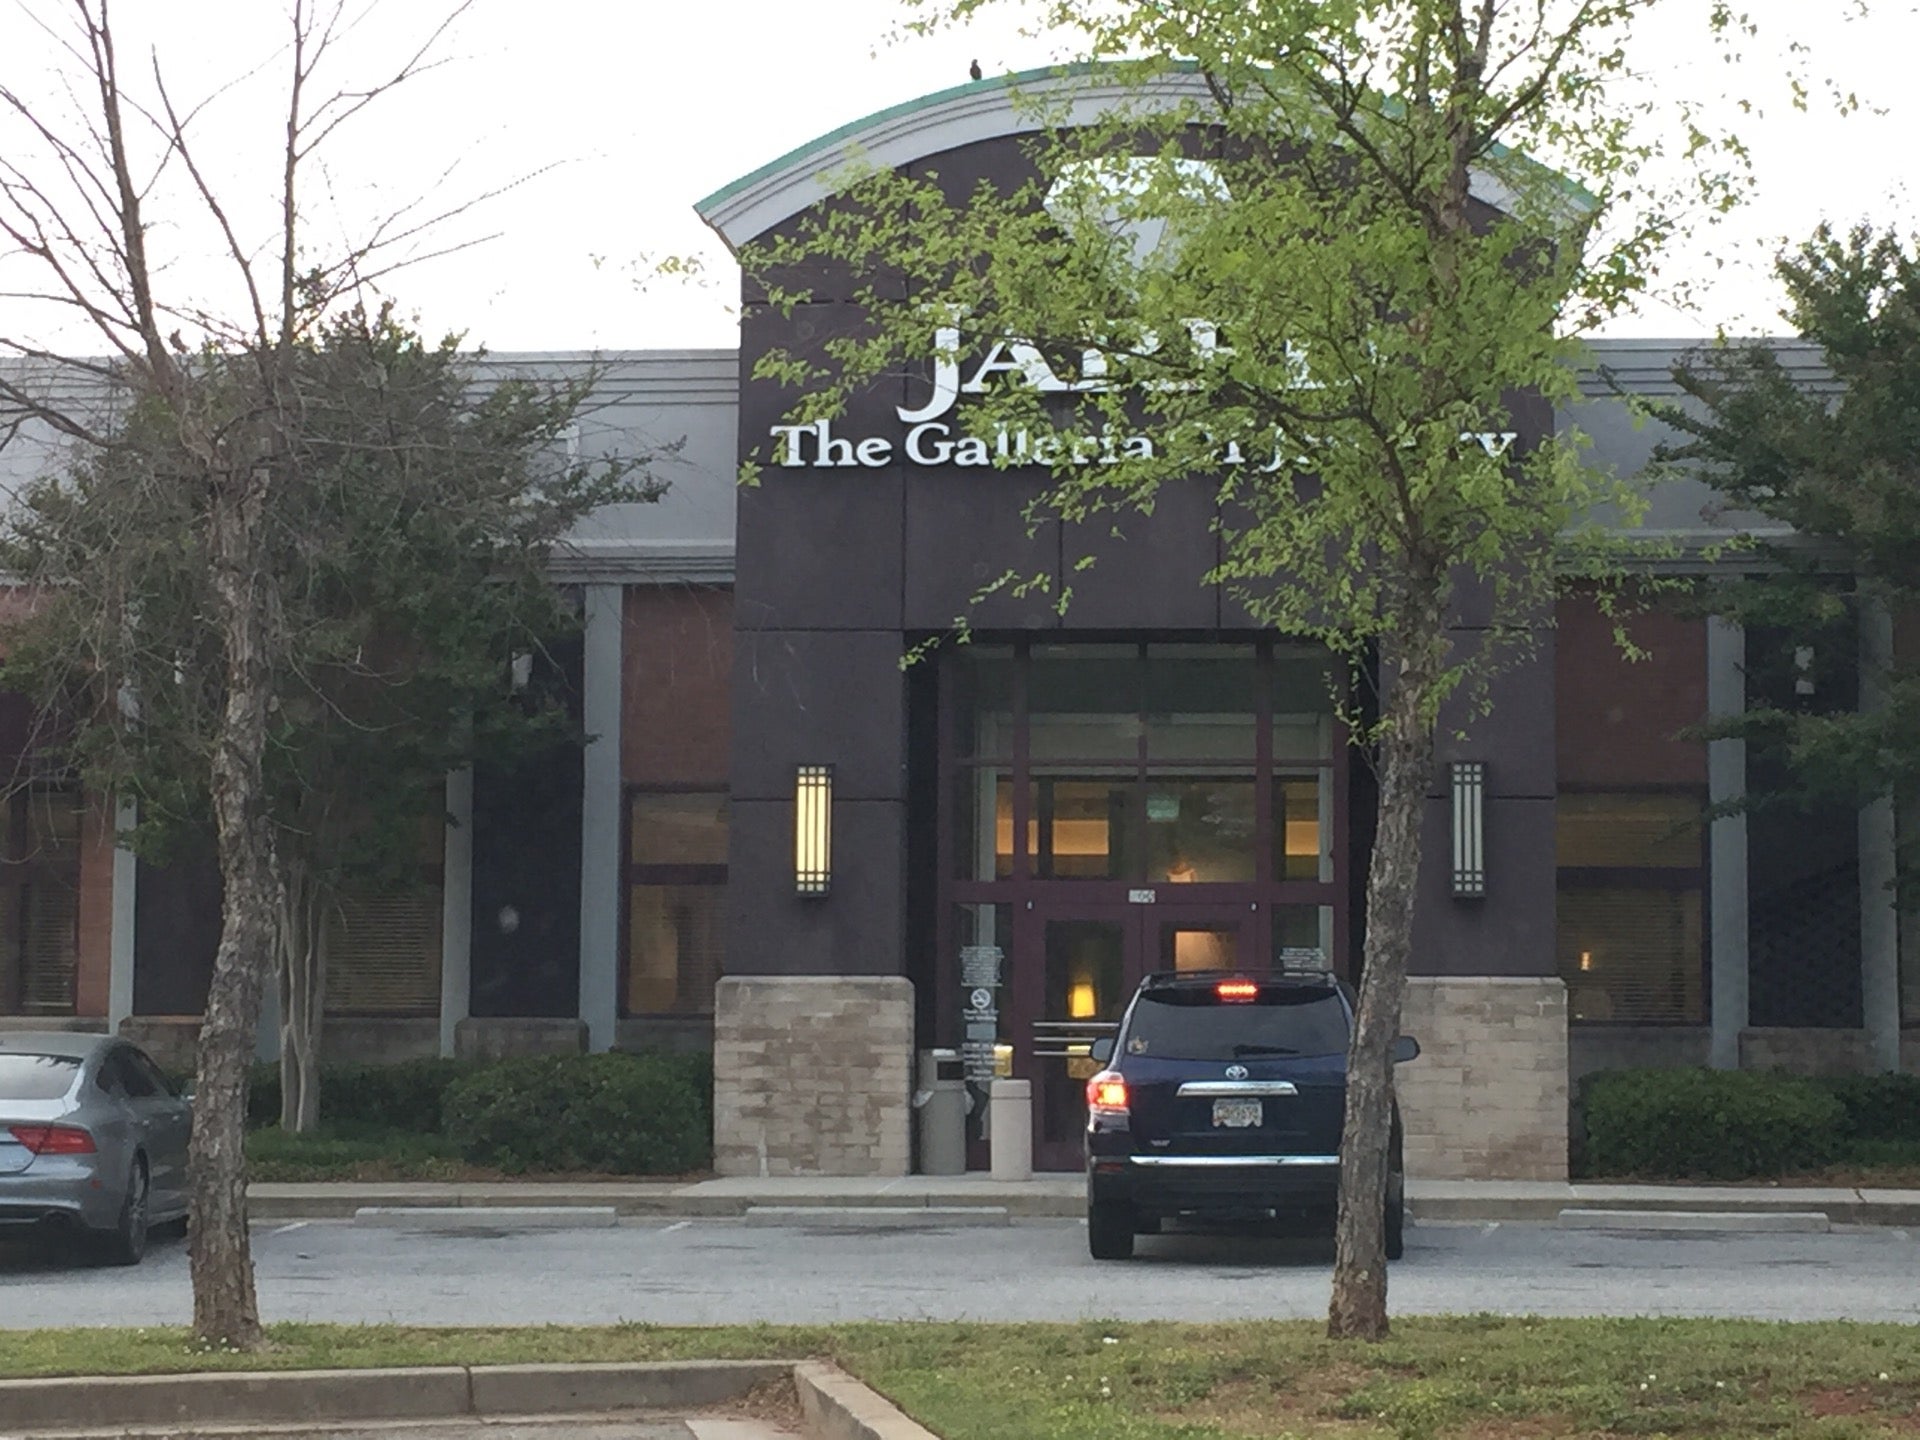 Town Center at Cobb, 400 Ernest W Barrett Pkwy NW, Kennesaw, Georgia,  Jewelry, precious stones and precious metals - MapQuest